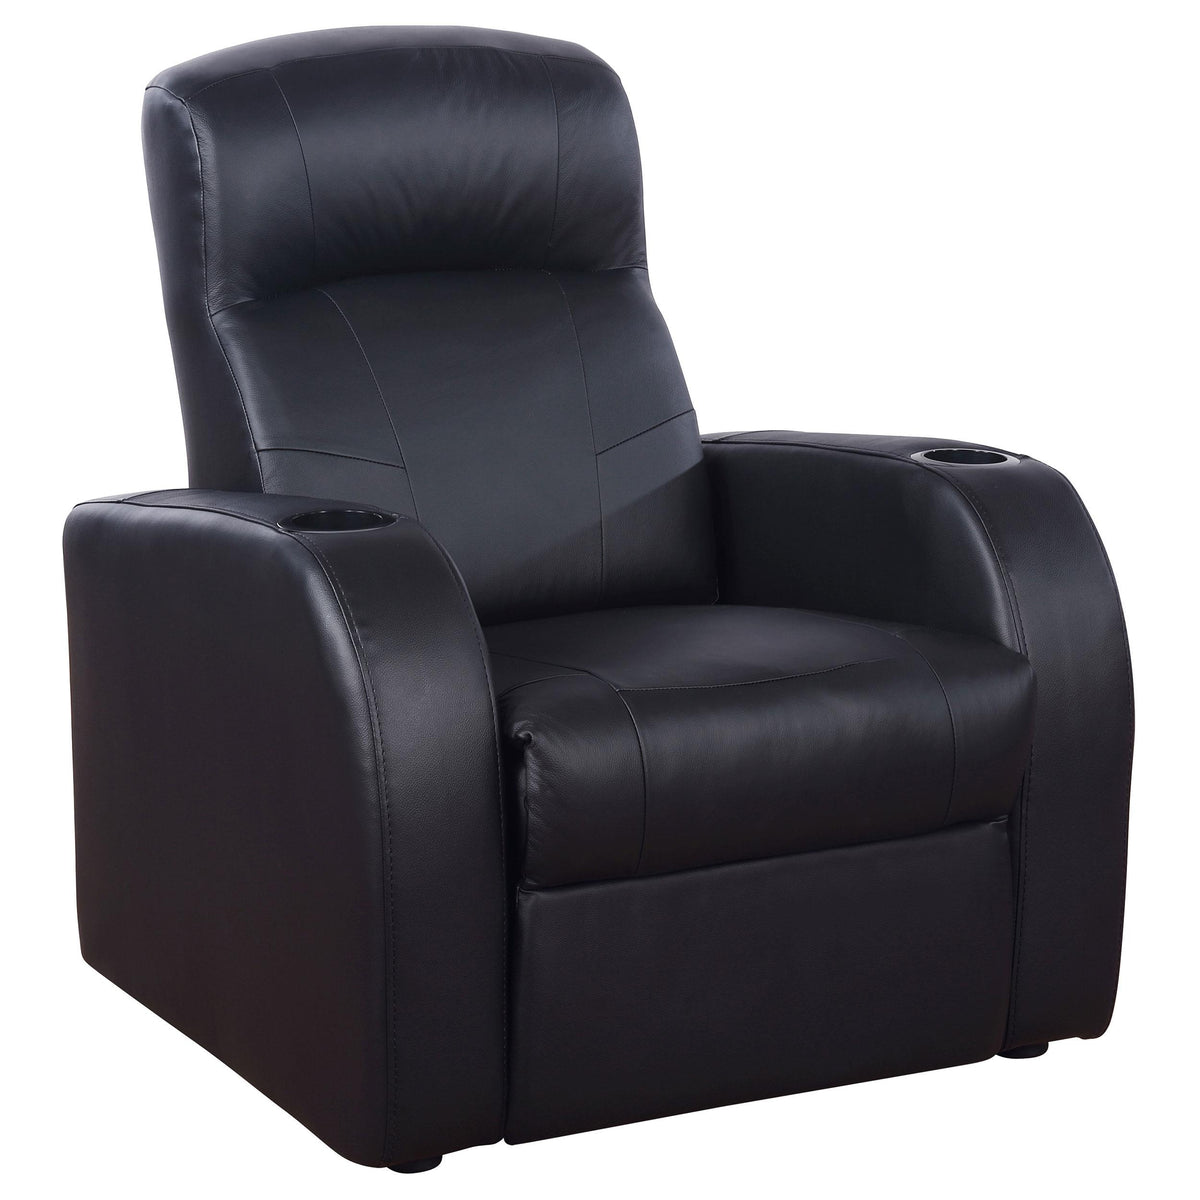 Cyrus Home Theater Upholstered Recliner Black  Las Vegas Furniture Stores